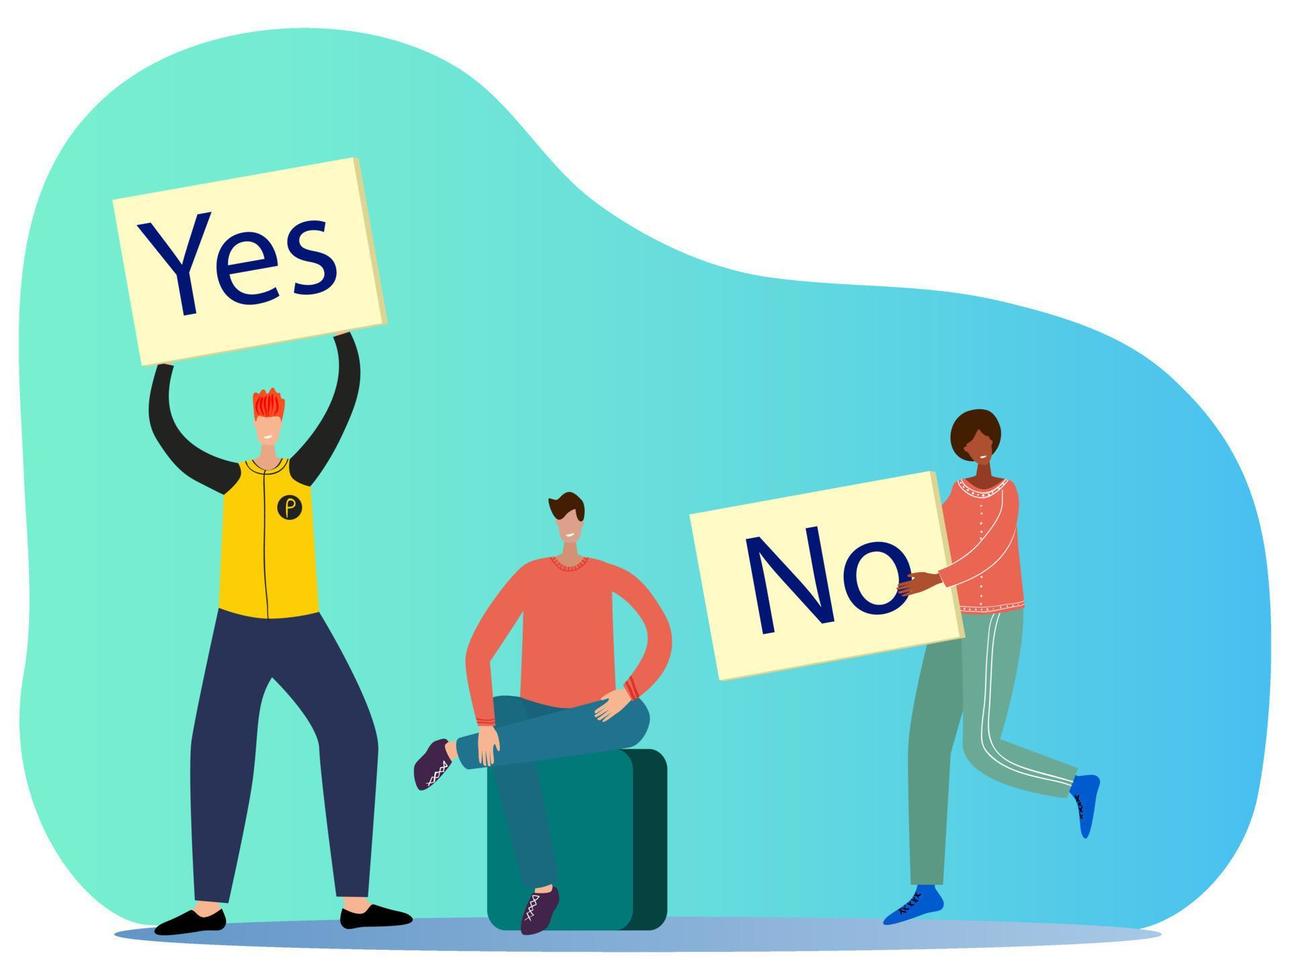 Vector illustration.Two people are arguing with each other holding Yes and No signs.The concept of disputes, debates, negotiations